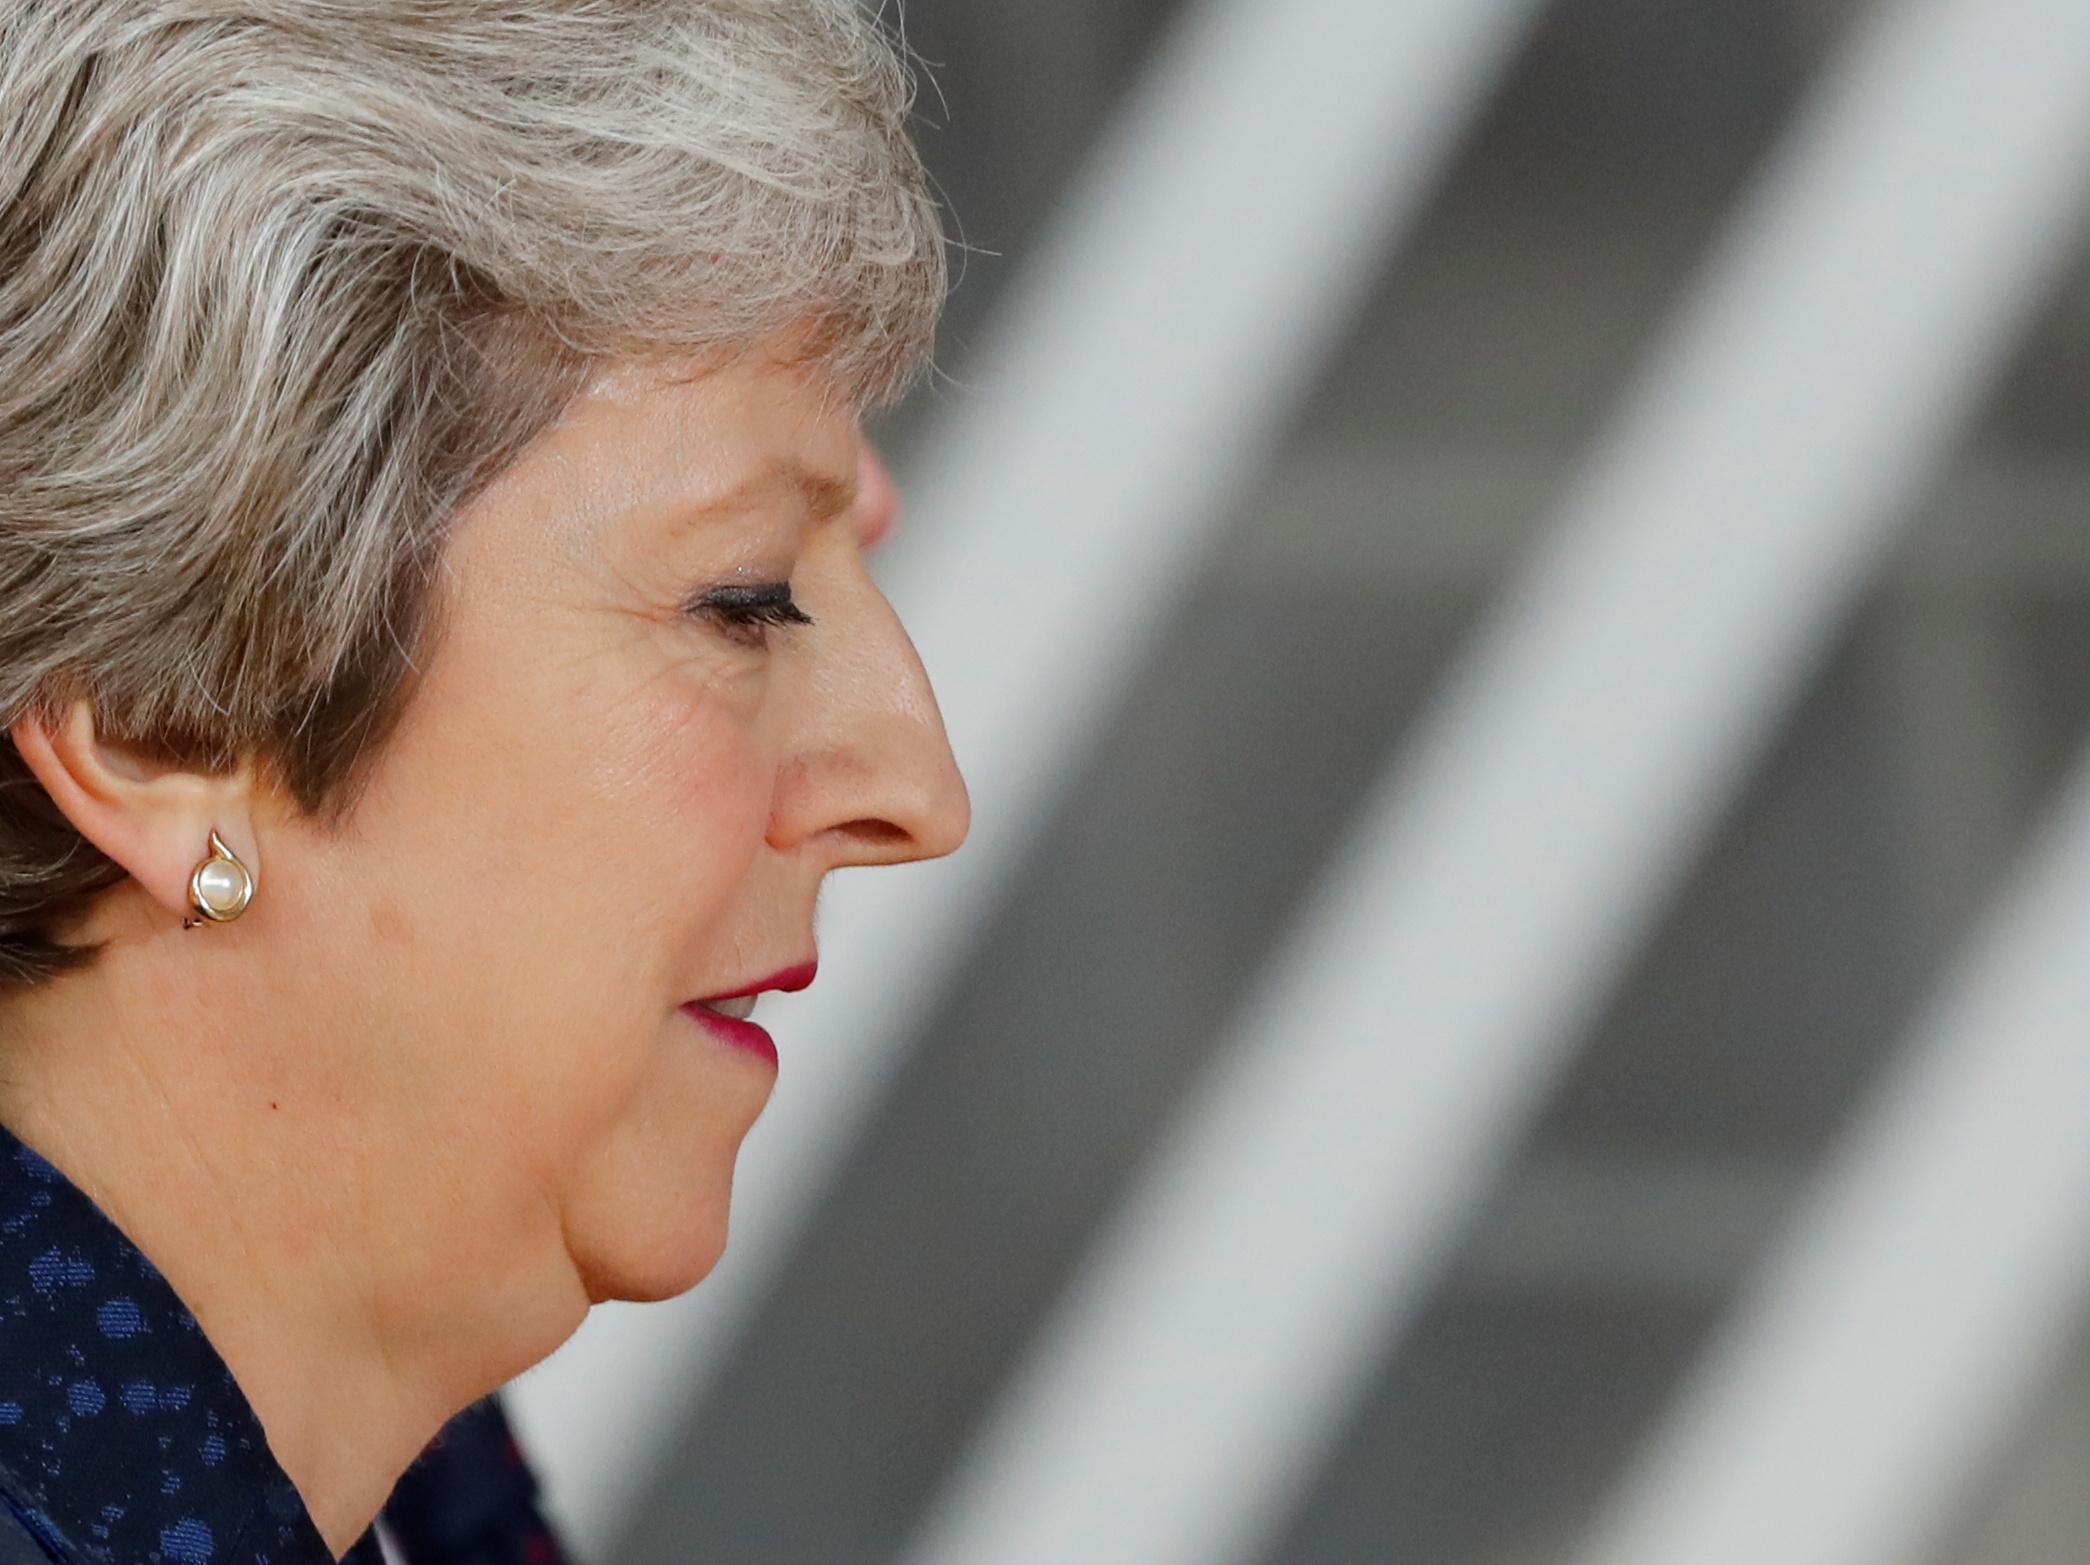 Facilitated customs arrangement: What is Theresa May&apos;s latest Brexit plan and will it win cabinet approval at Chequers?